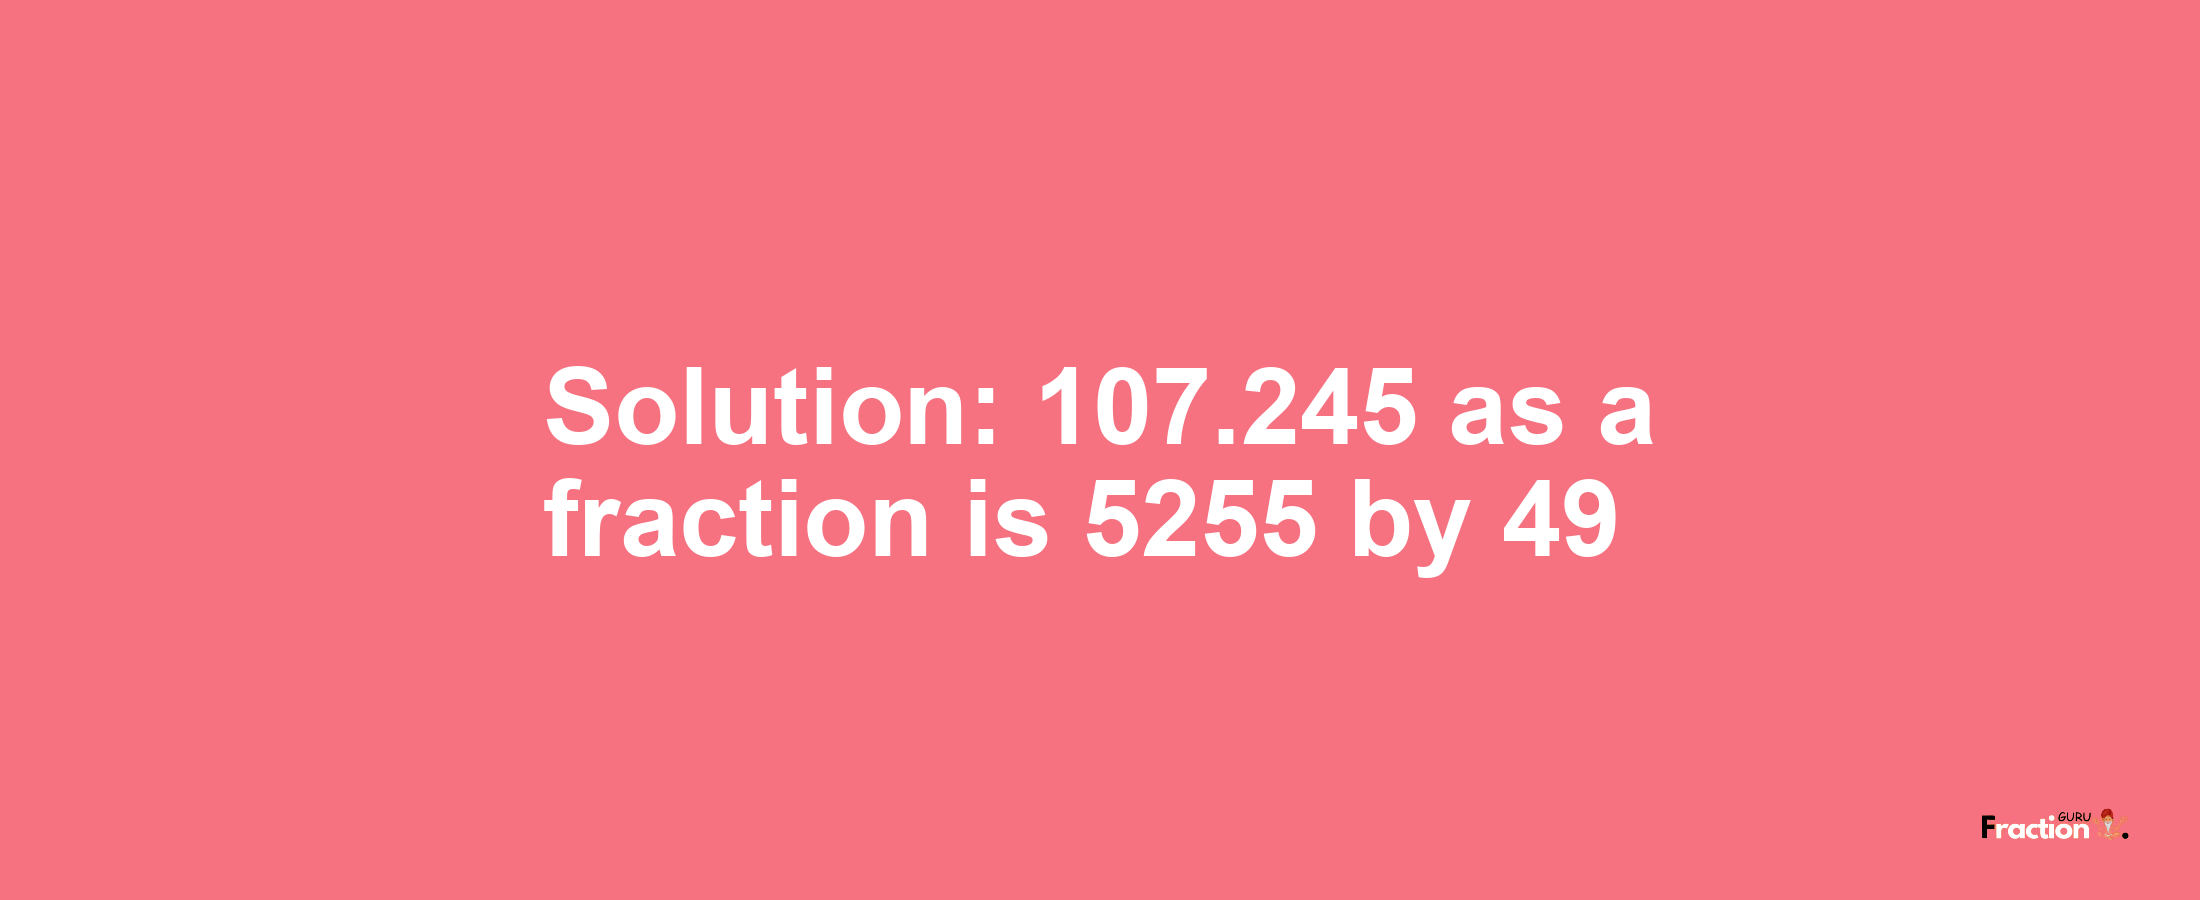 Solution:107.245 as a fraction is 5255/49